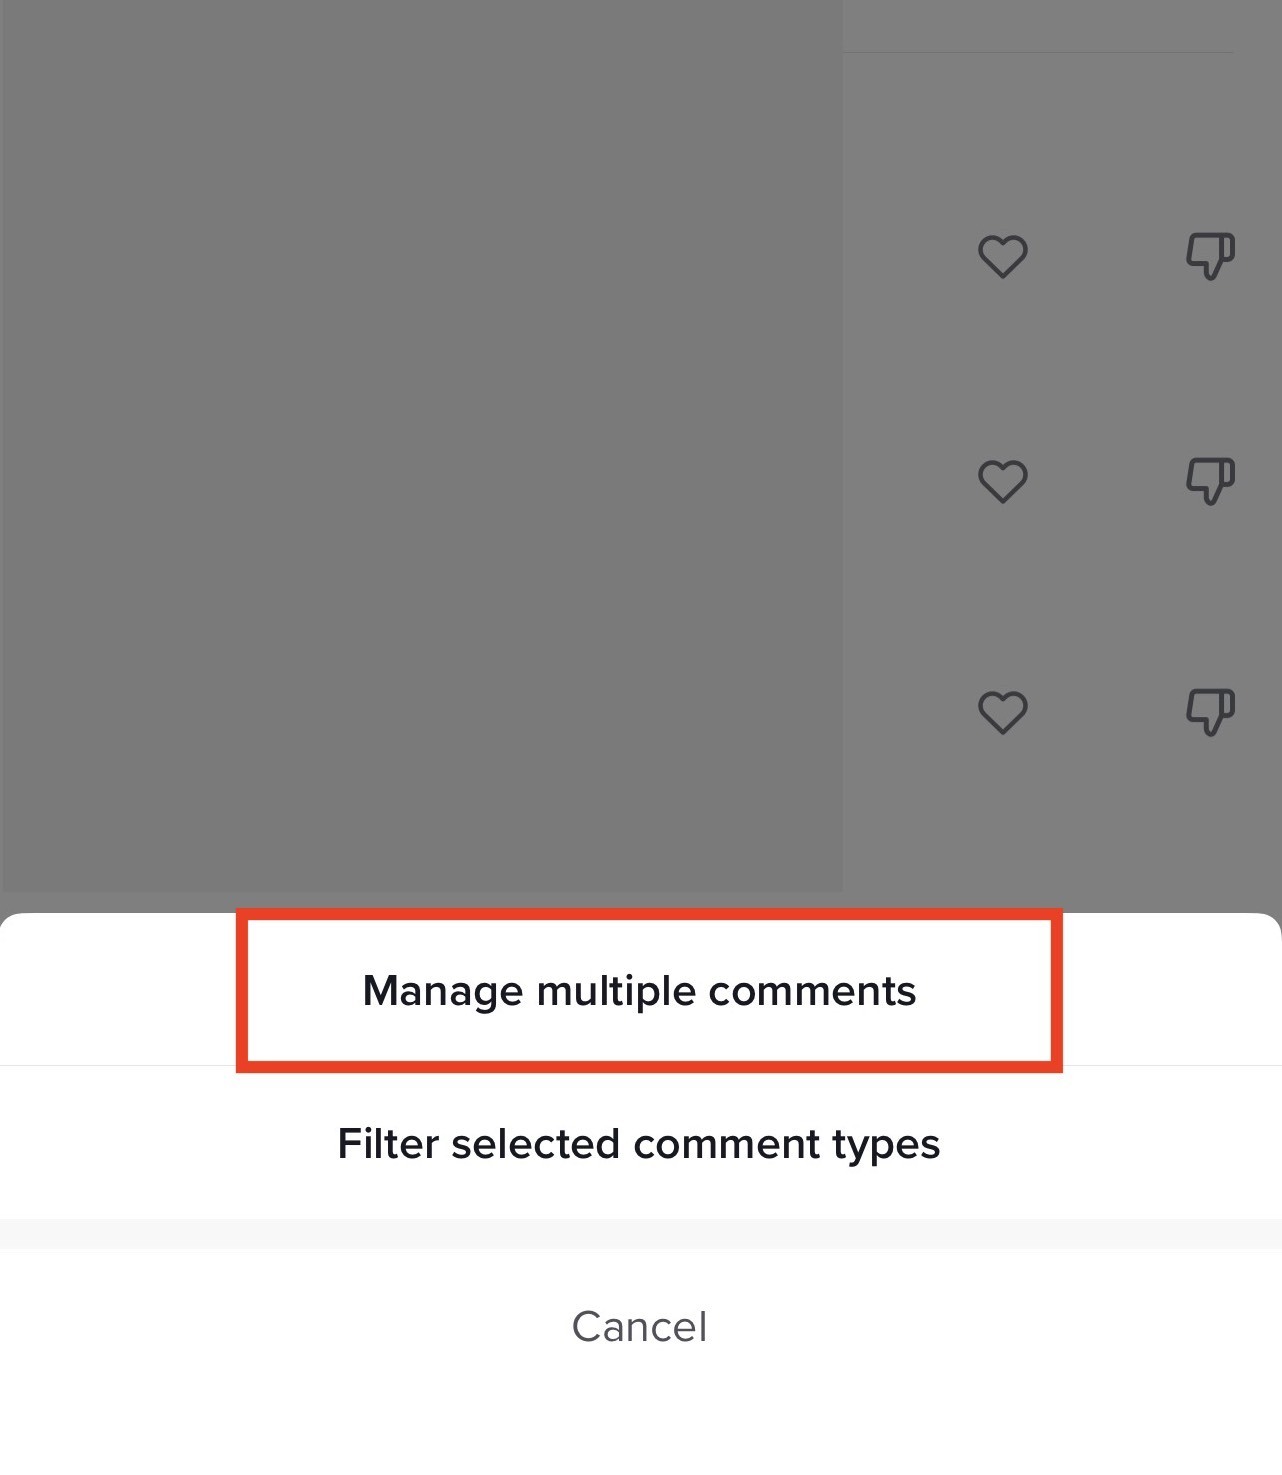 Manage multiple comments